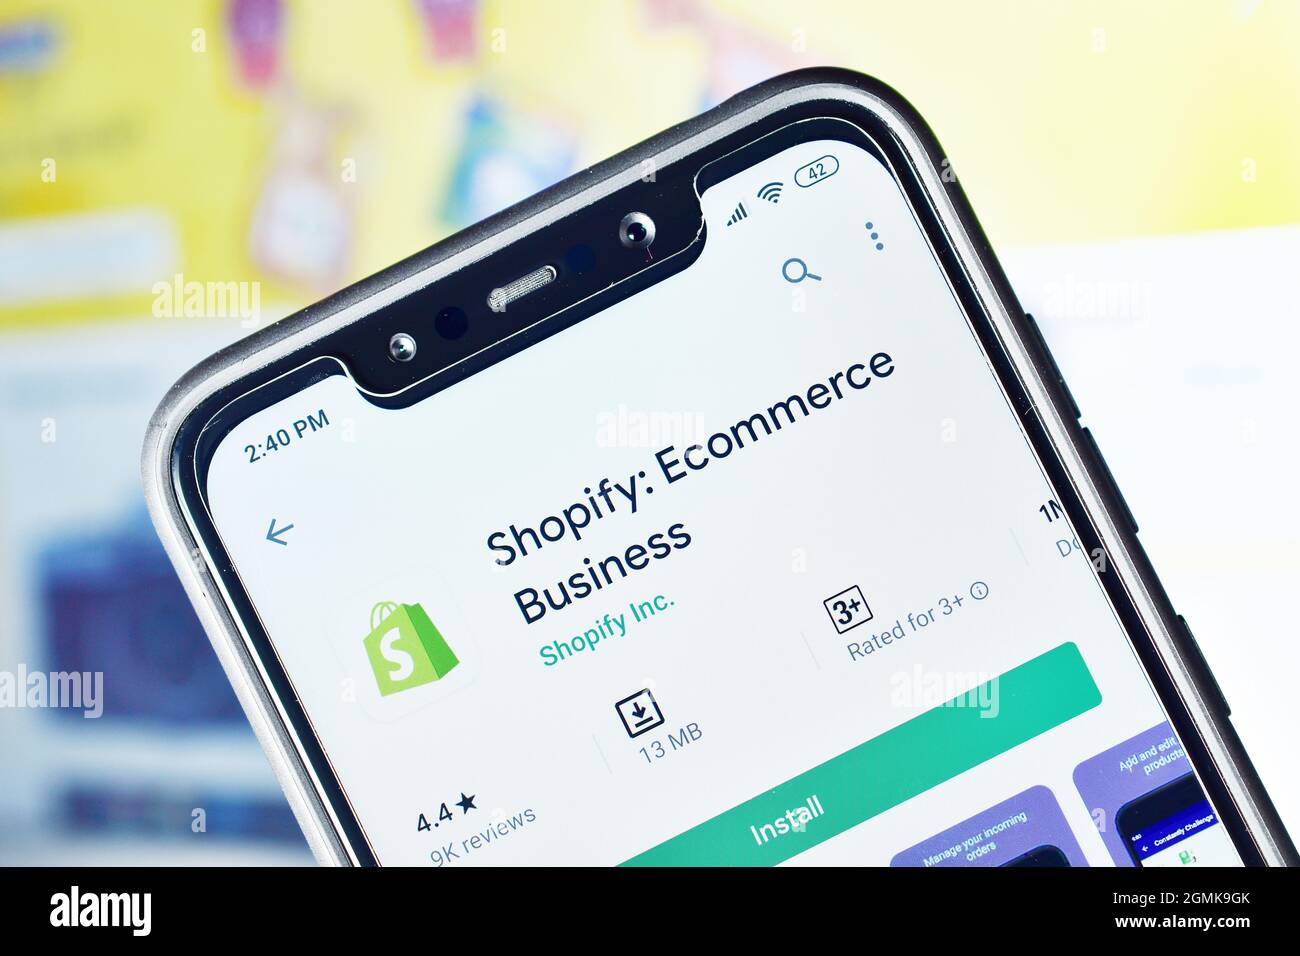 Shopify app on Smartphone, Shopify is Ecommerce Website Builder Stock Photo